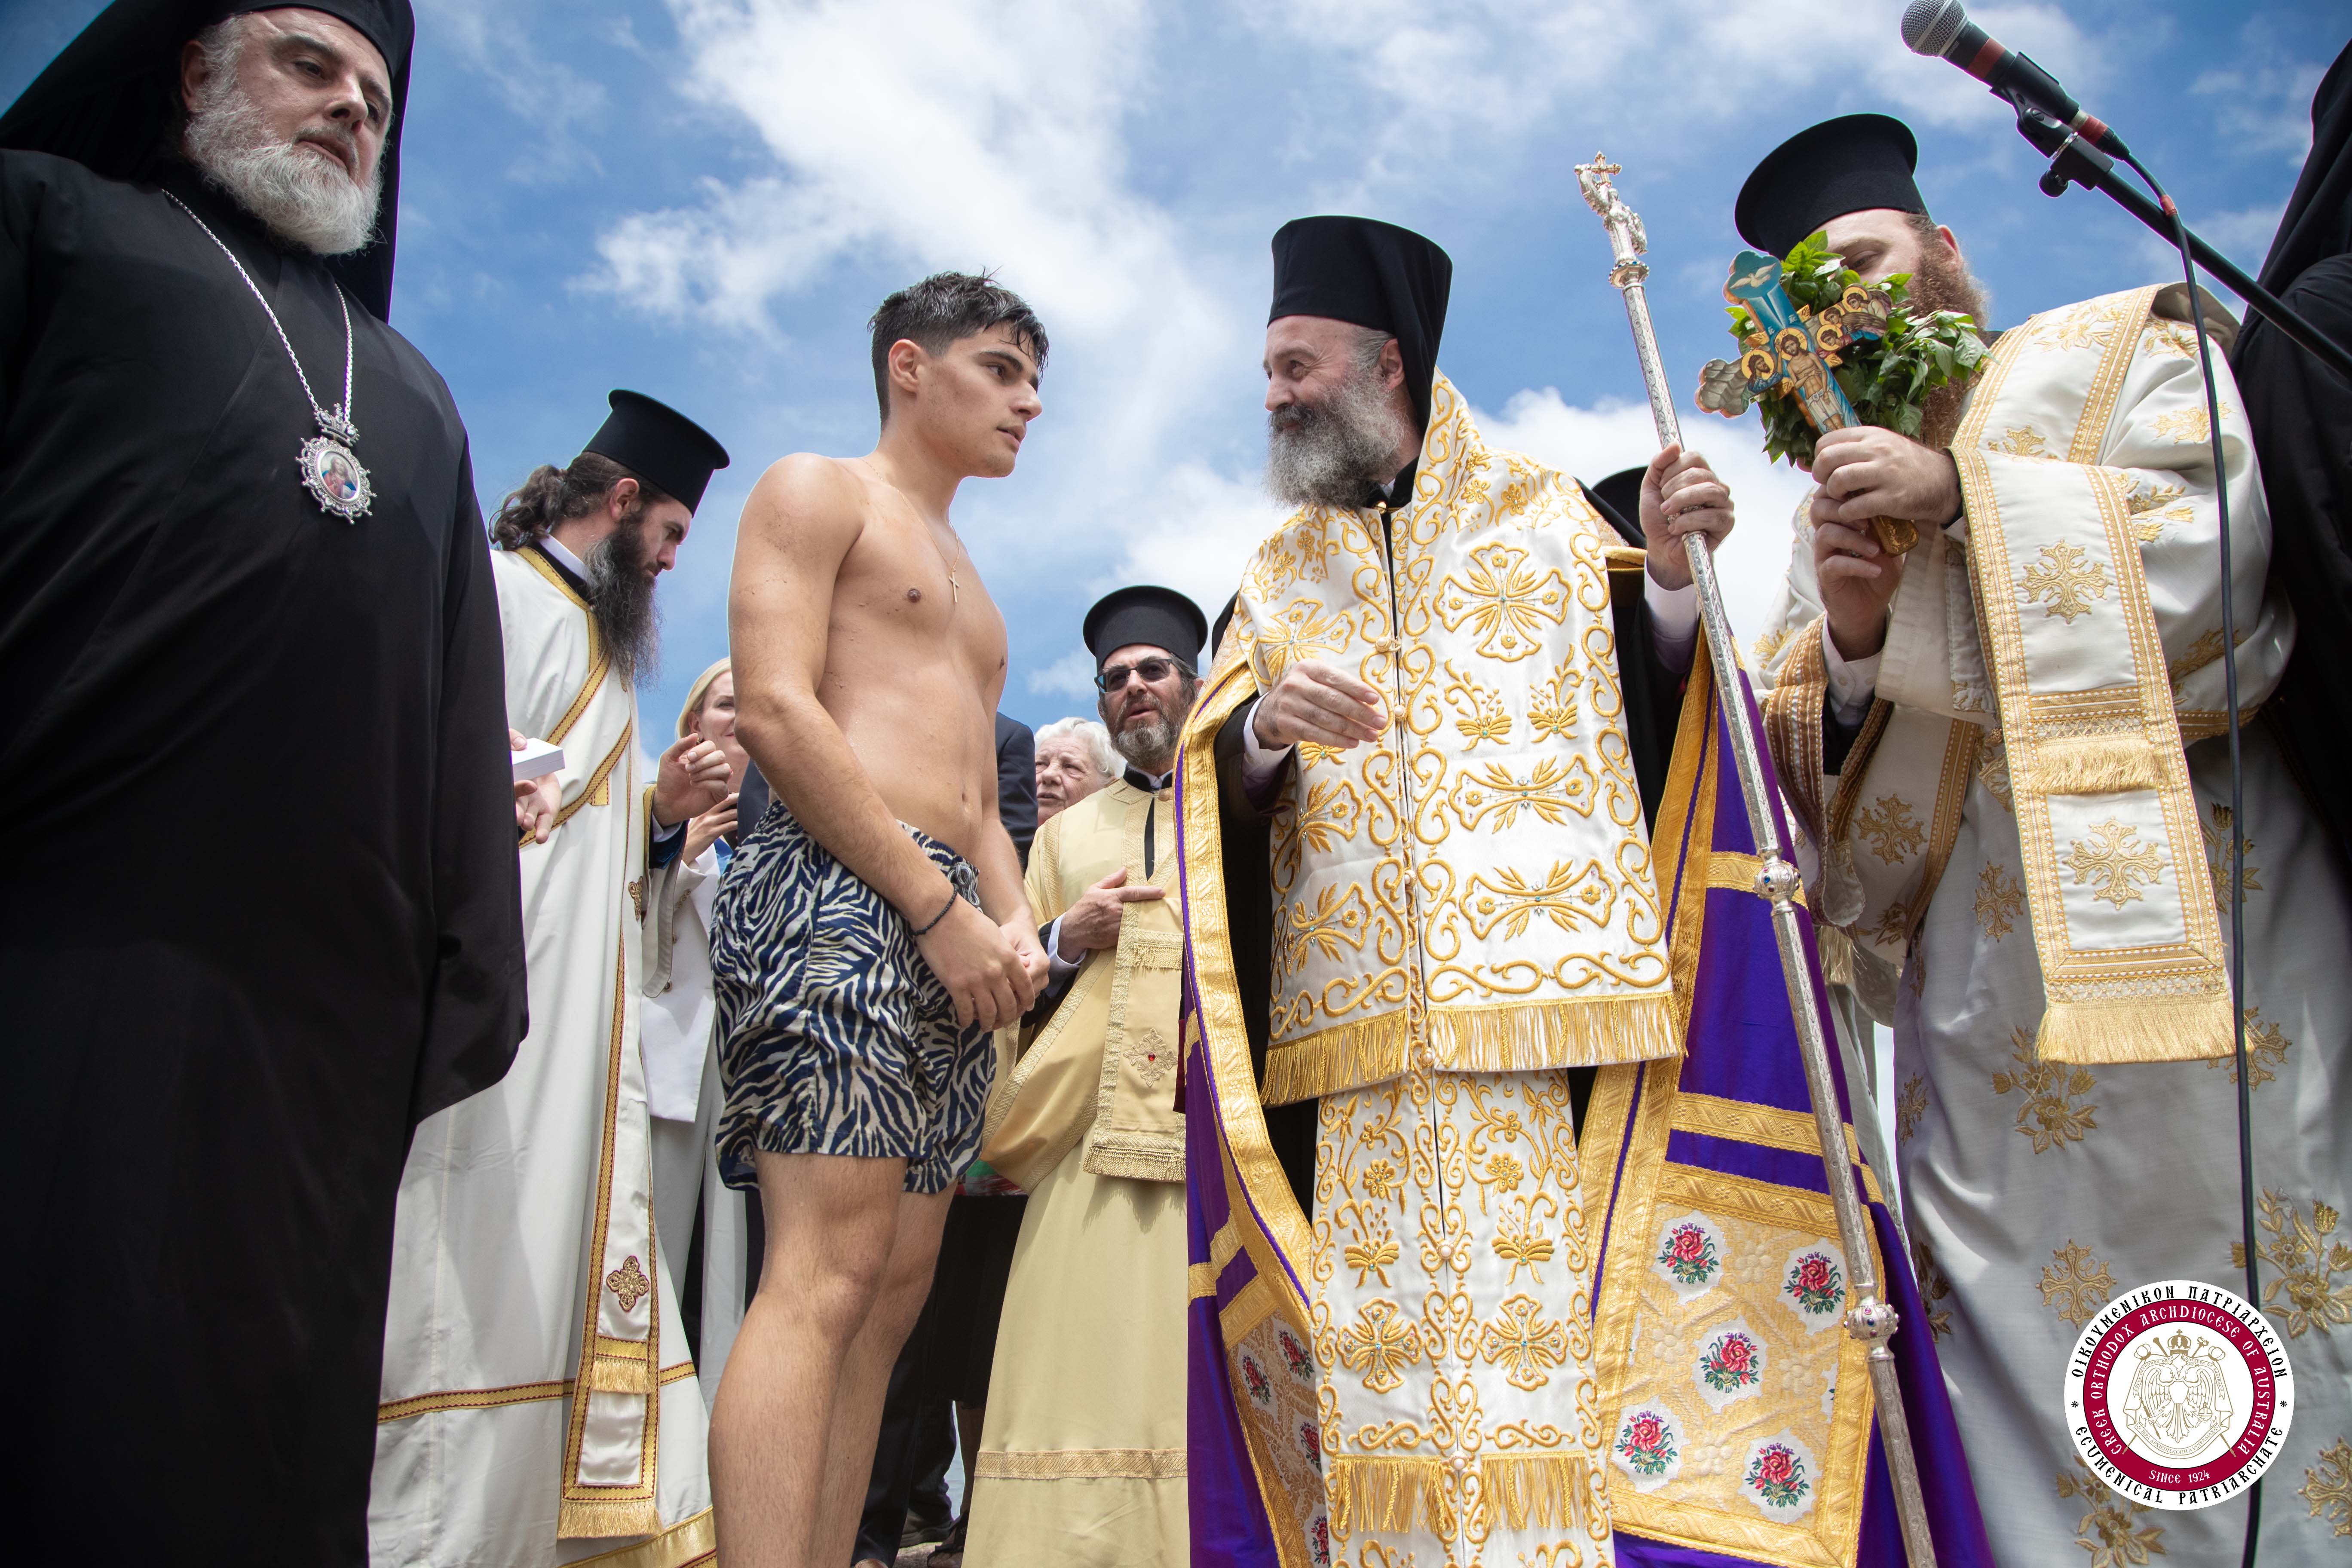 Thousands of faithful attend the Blessing of the Waters by Archbishop Makarios of Australia in Sydney